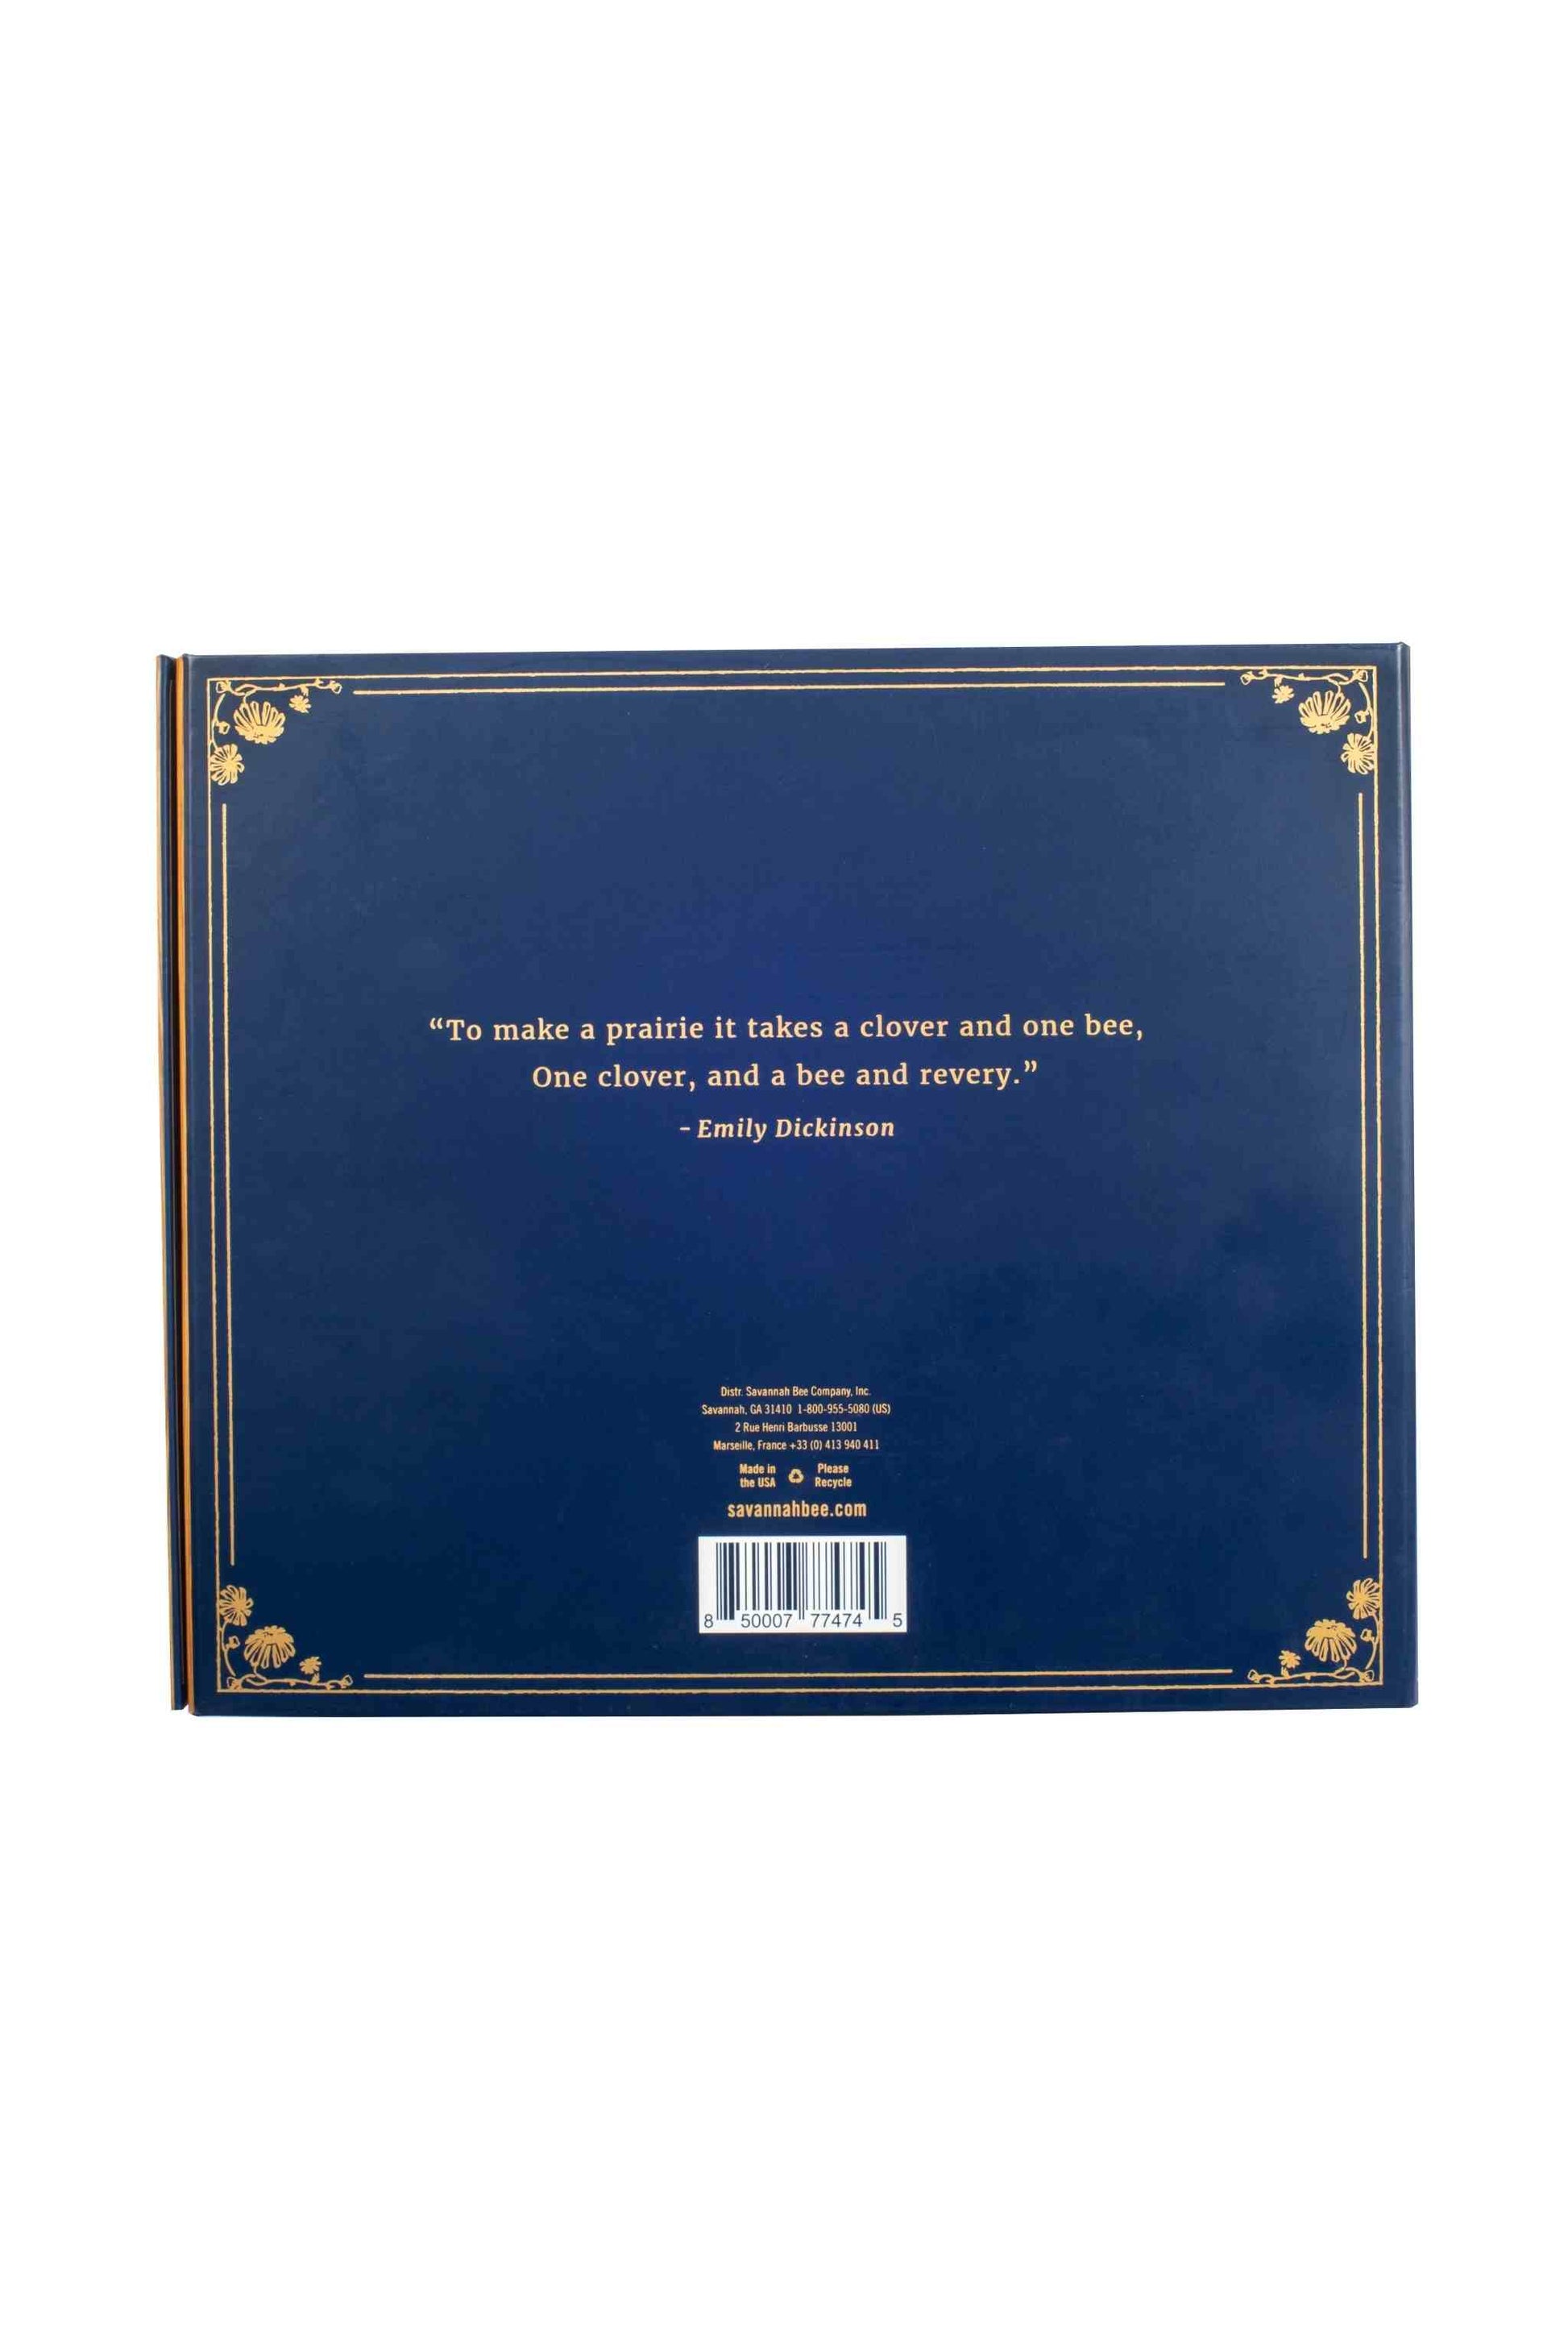 The back of the Book of Honey Gift Set against a white background.